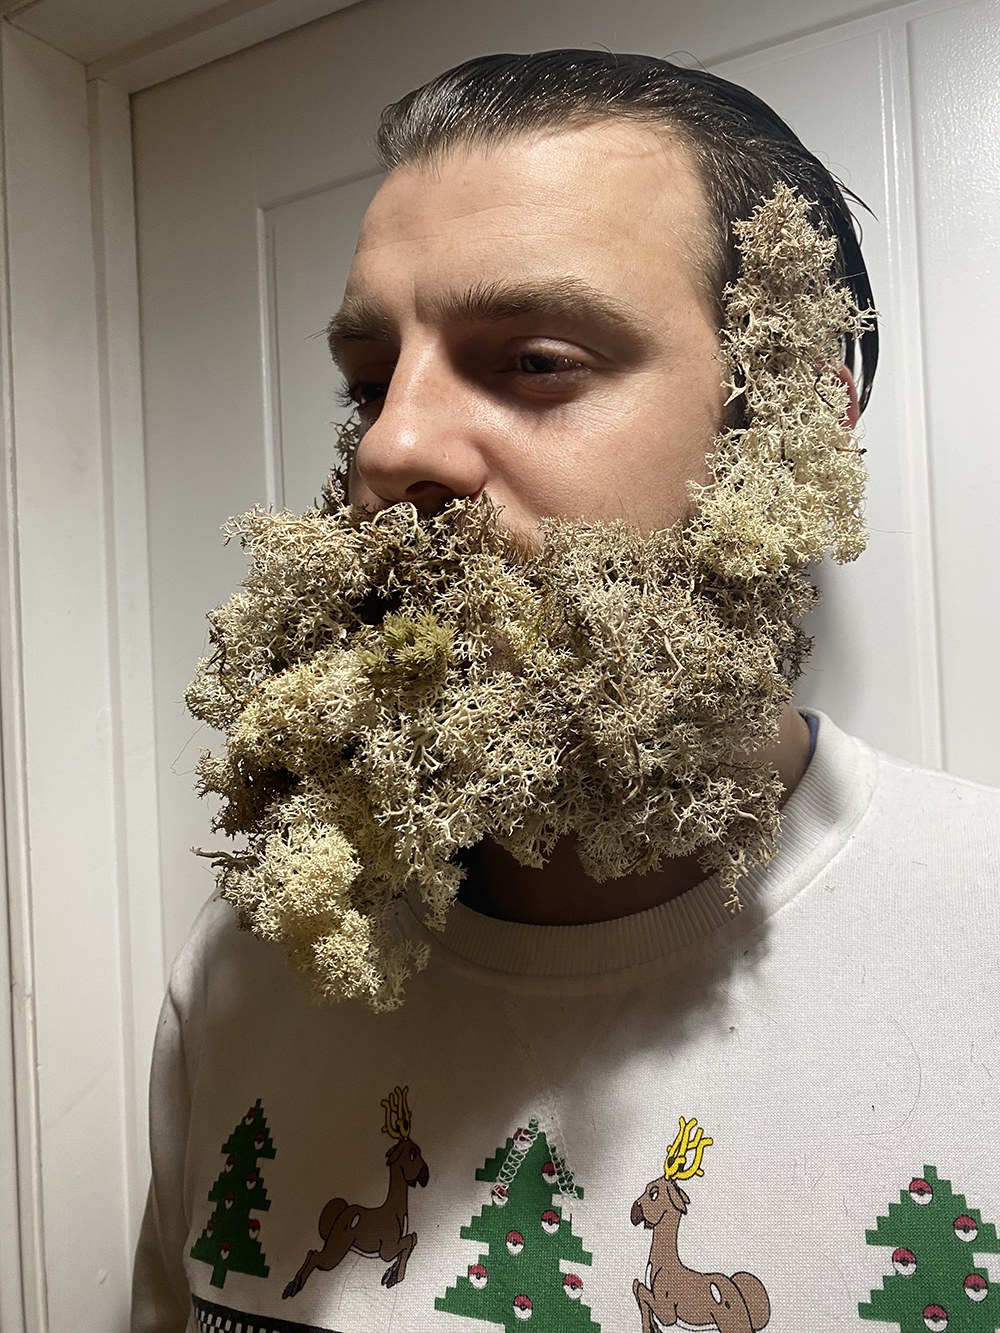 Make-up look created by student Annistasia Chandler showing a man with a moss beard